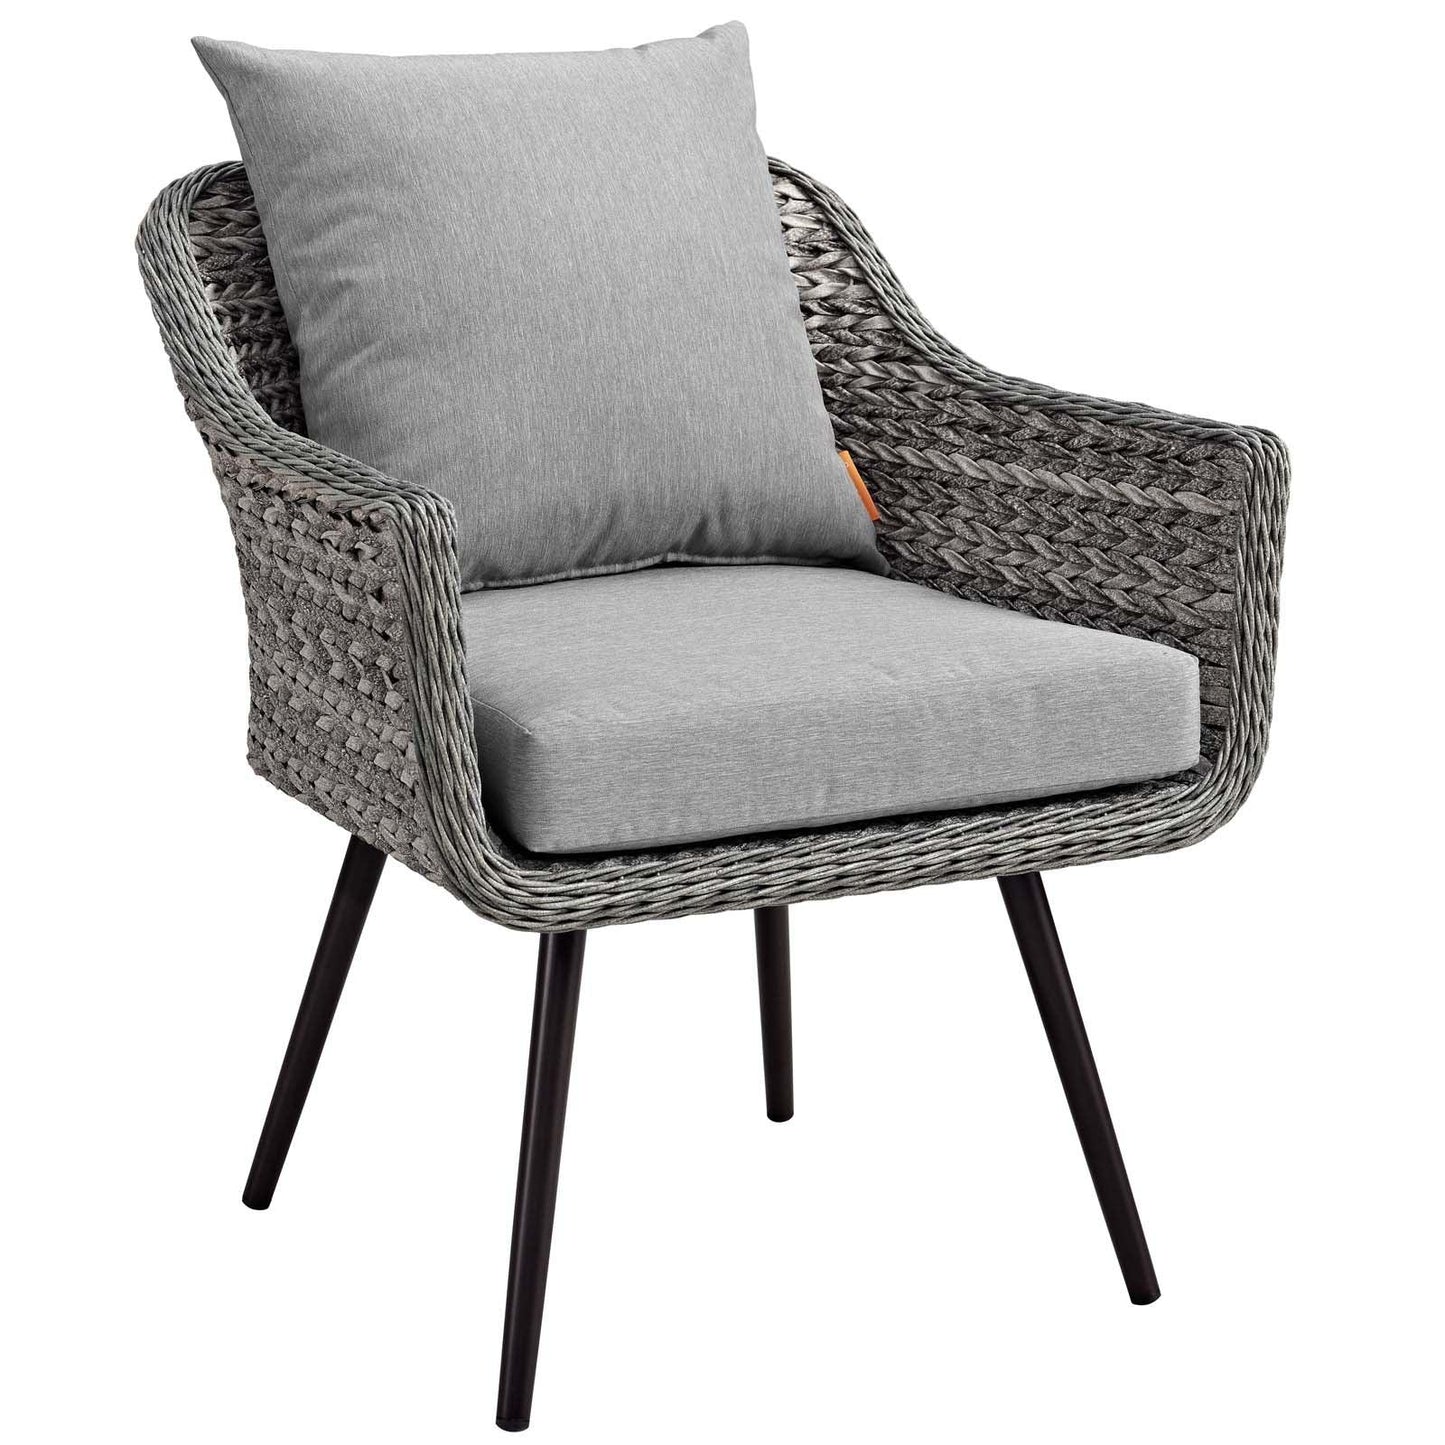 Modway Endeavor 3 Piece Outdoor Patio Wicker Rattan Armchair and Coffee Table Set FredCo